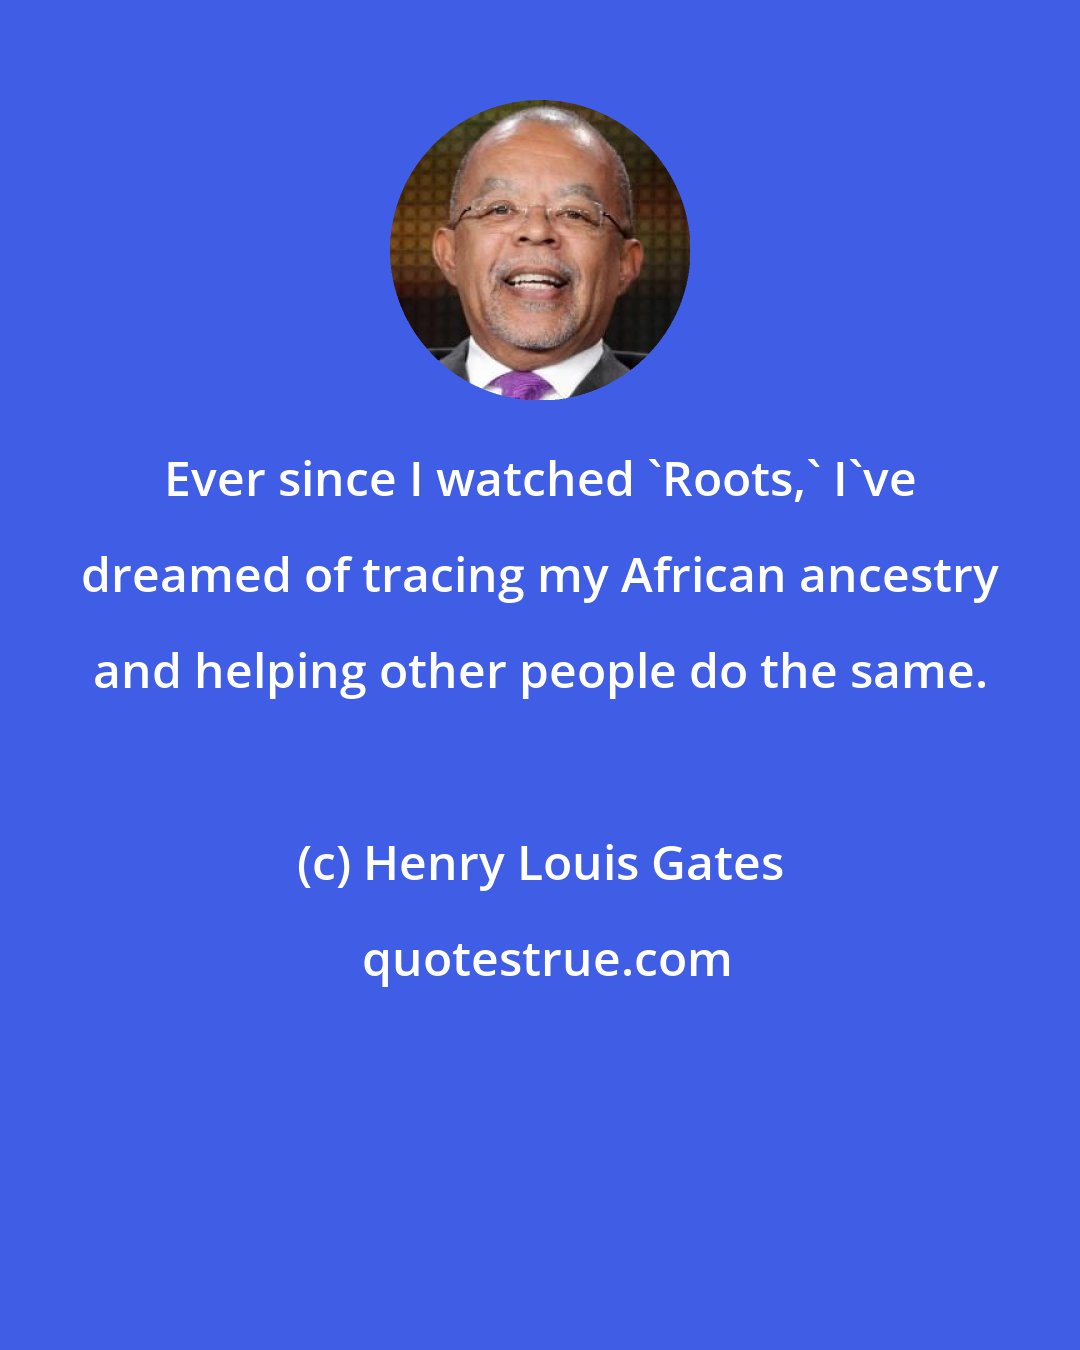 Henry Louis Gates: Ever since I watched 'Roots,' I've dreamed of tracing my African ancestry and helping other people do the same.